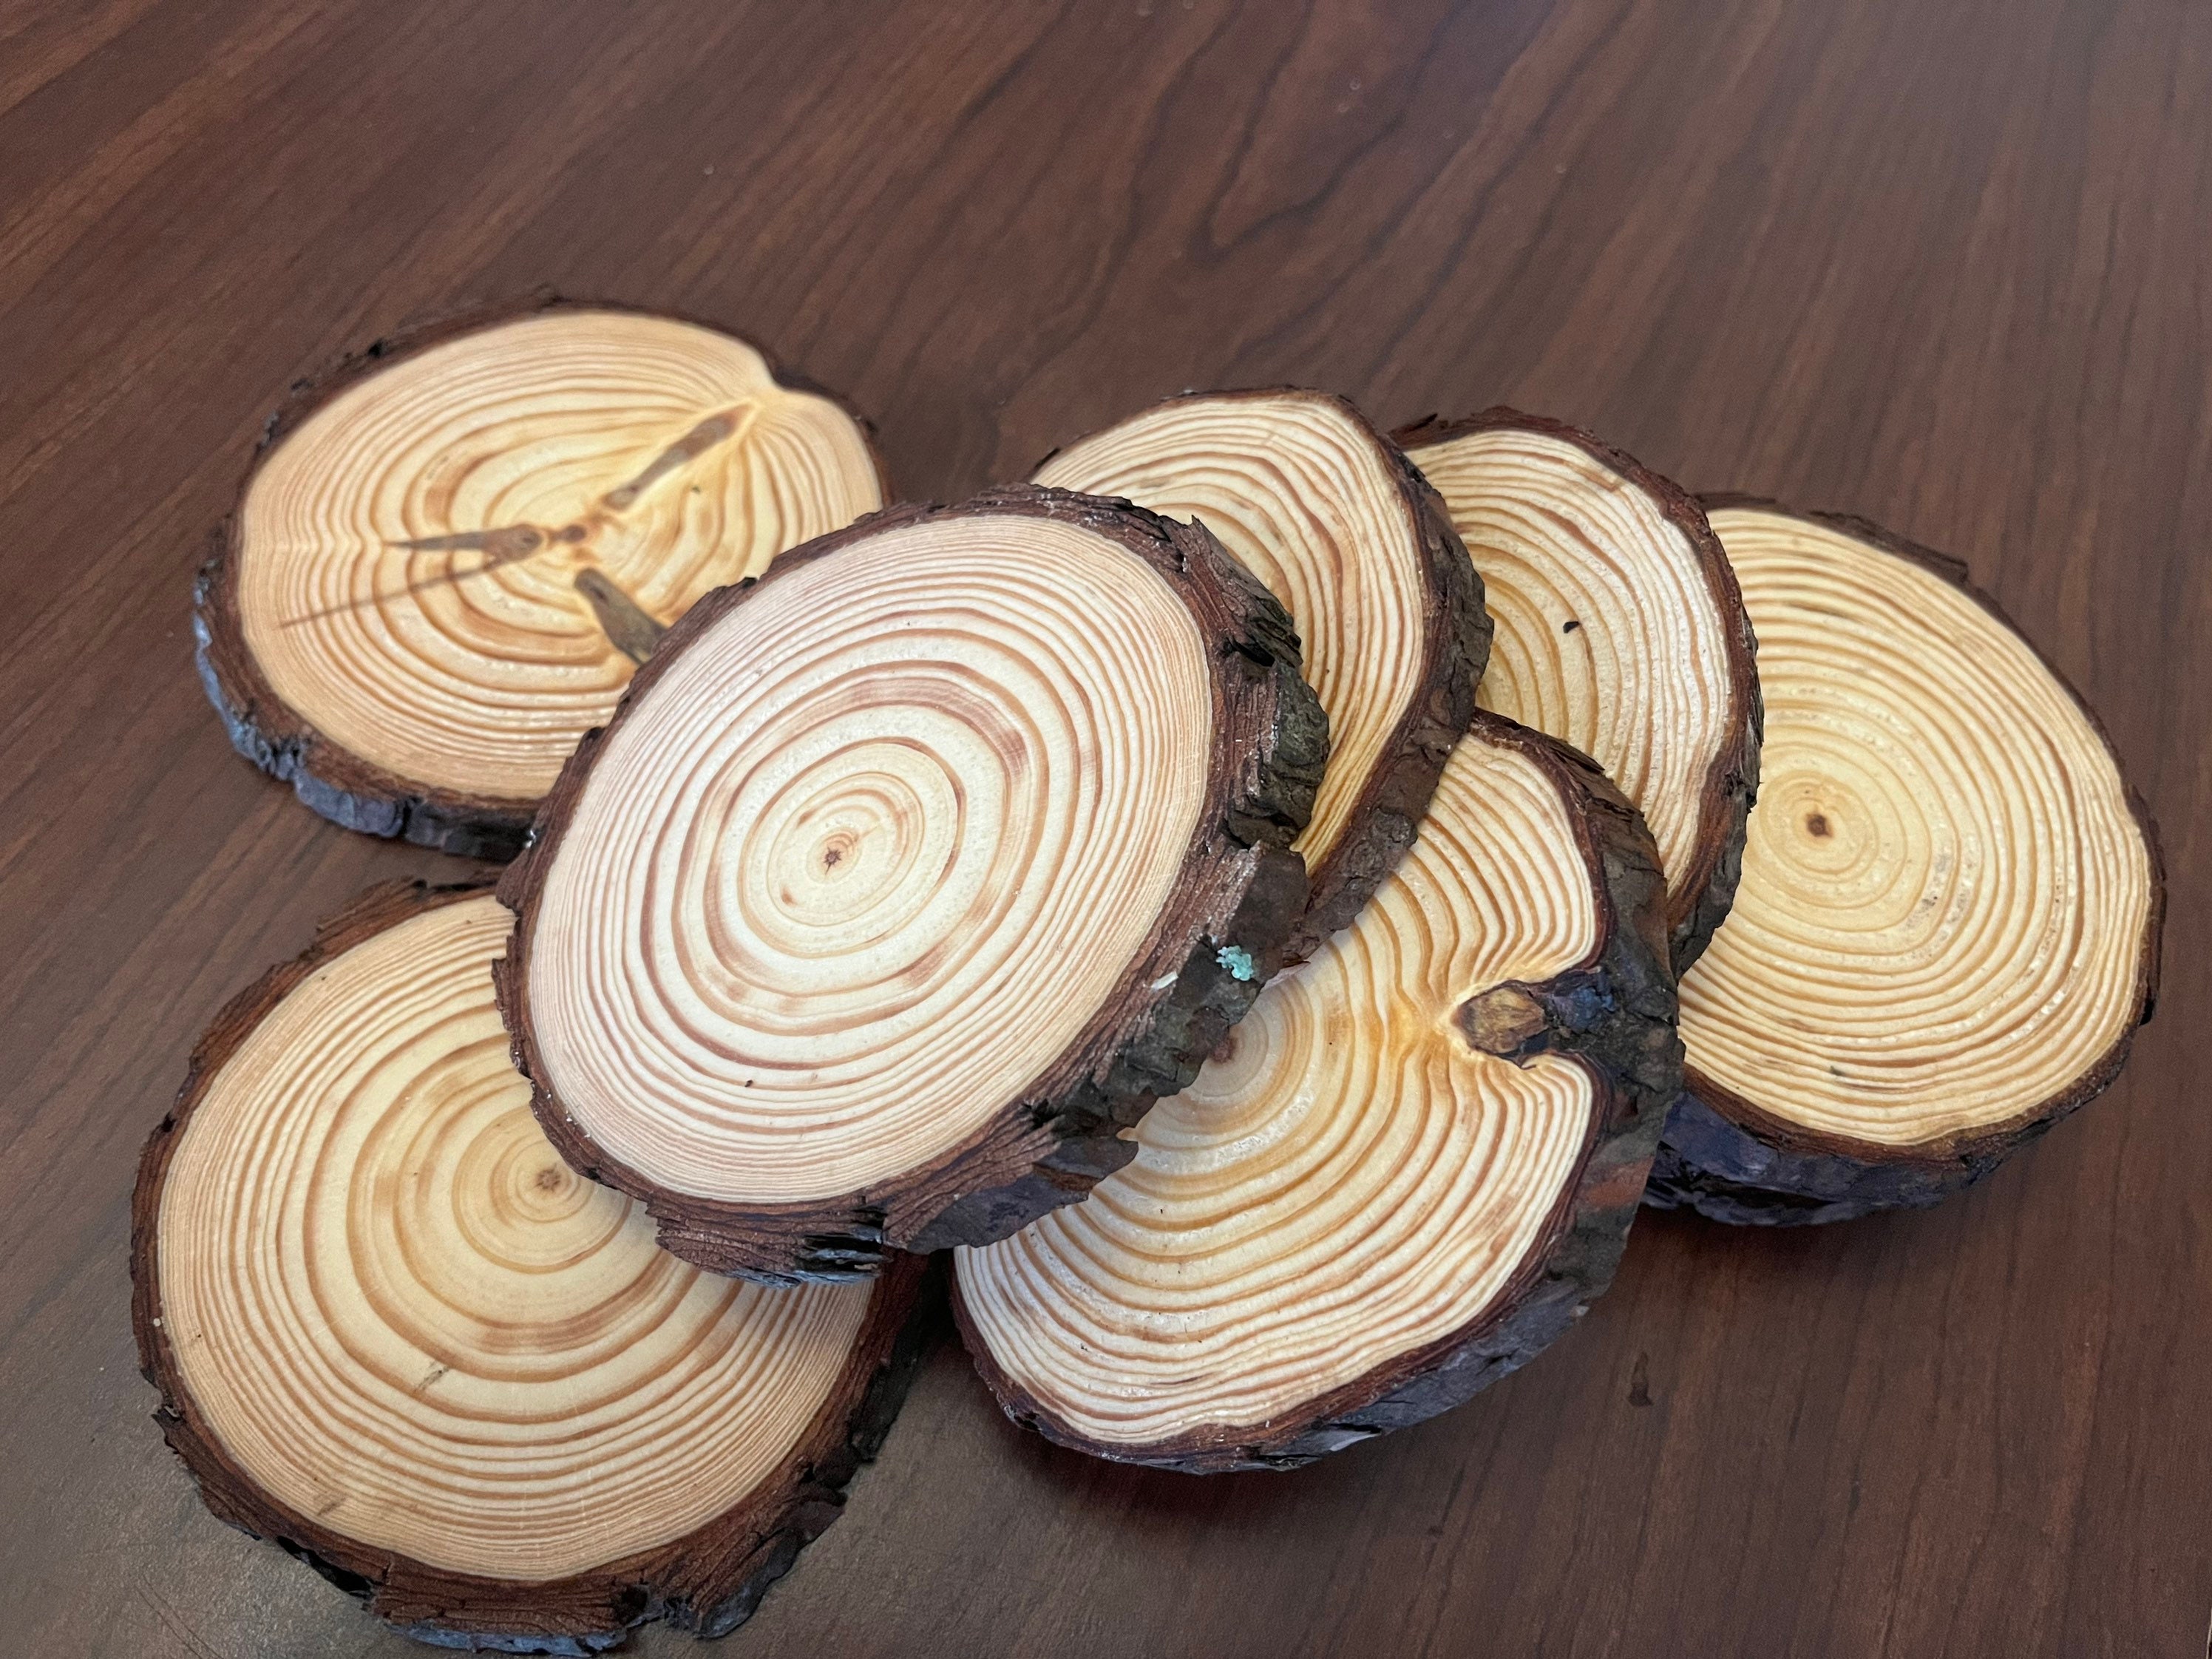 Natural Pine Wood Slabs Untreated 5-6 Inches Diameter x 3/5 inch Thick Large 4 Pieces Solid Wood Slices for Weddings, Table Centerpieces, DIY Projects